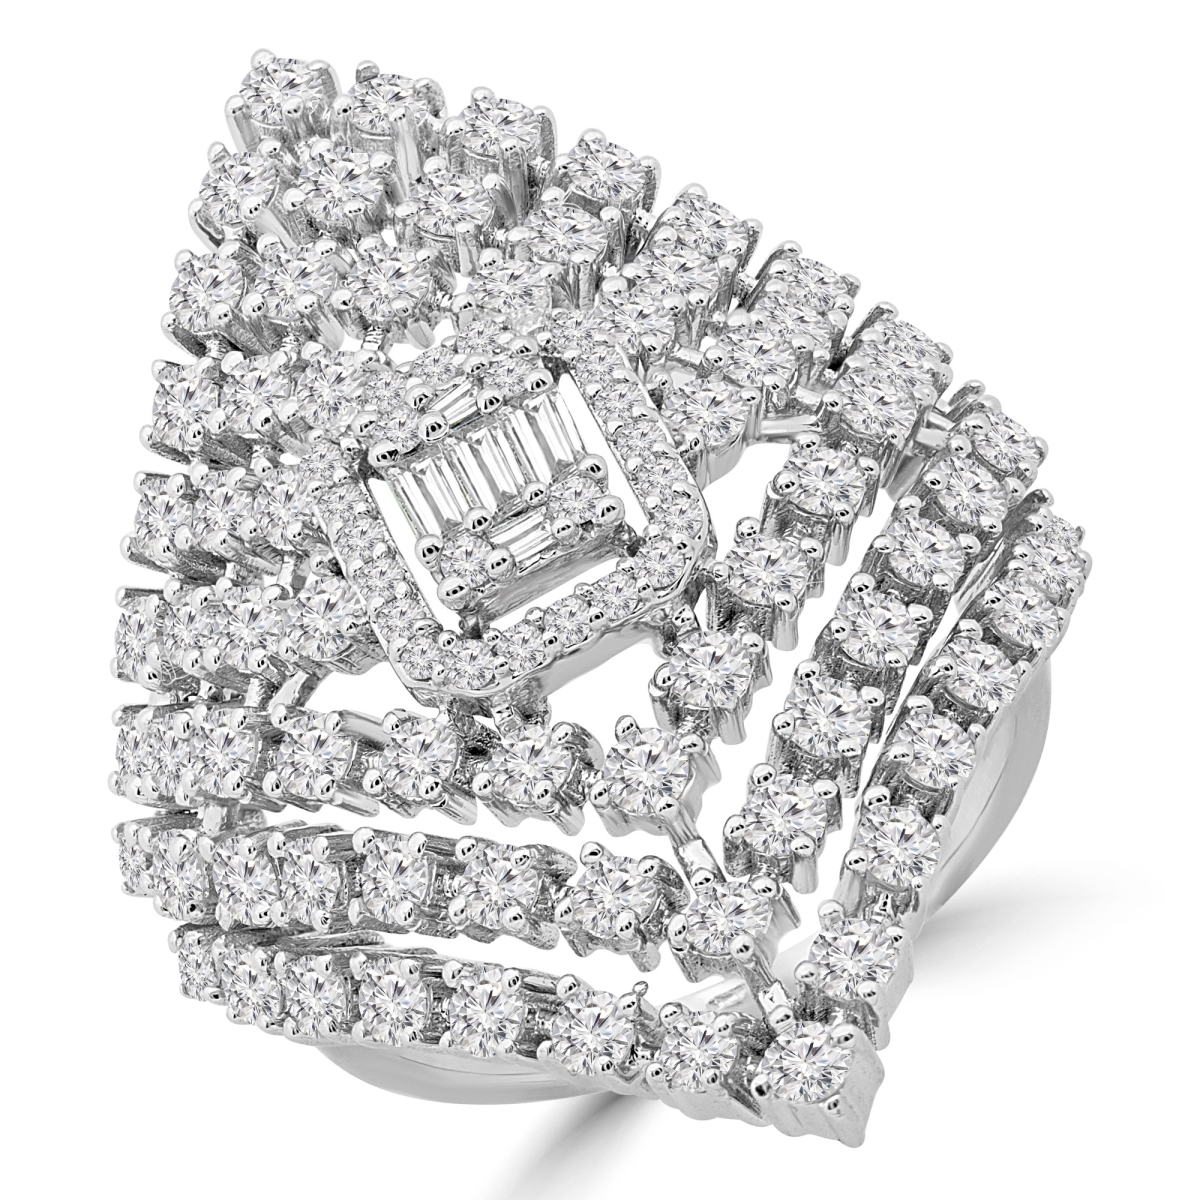 Picture of Majesty Diamonds MDR190084-3.25 2.125 CTW Baguette Diamond Cocktail Ring in 14K White Gold - Size 3.25